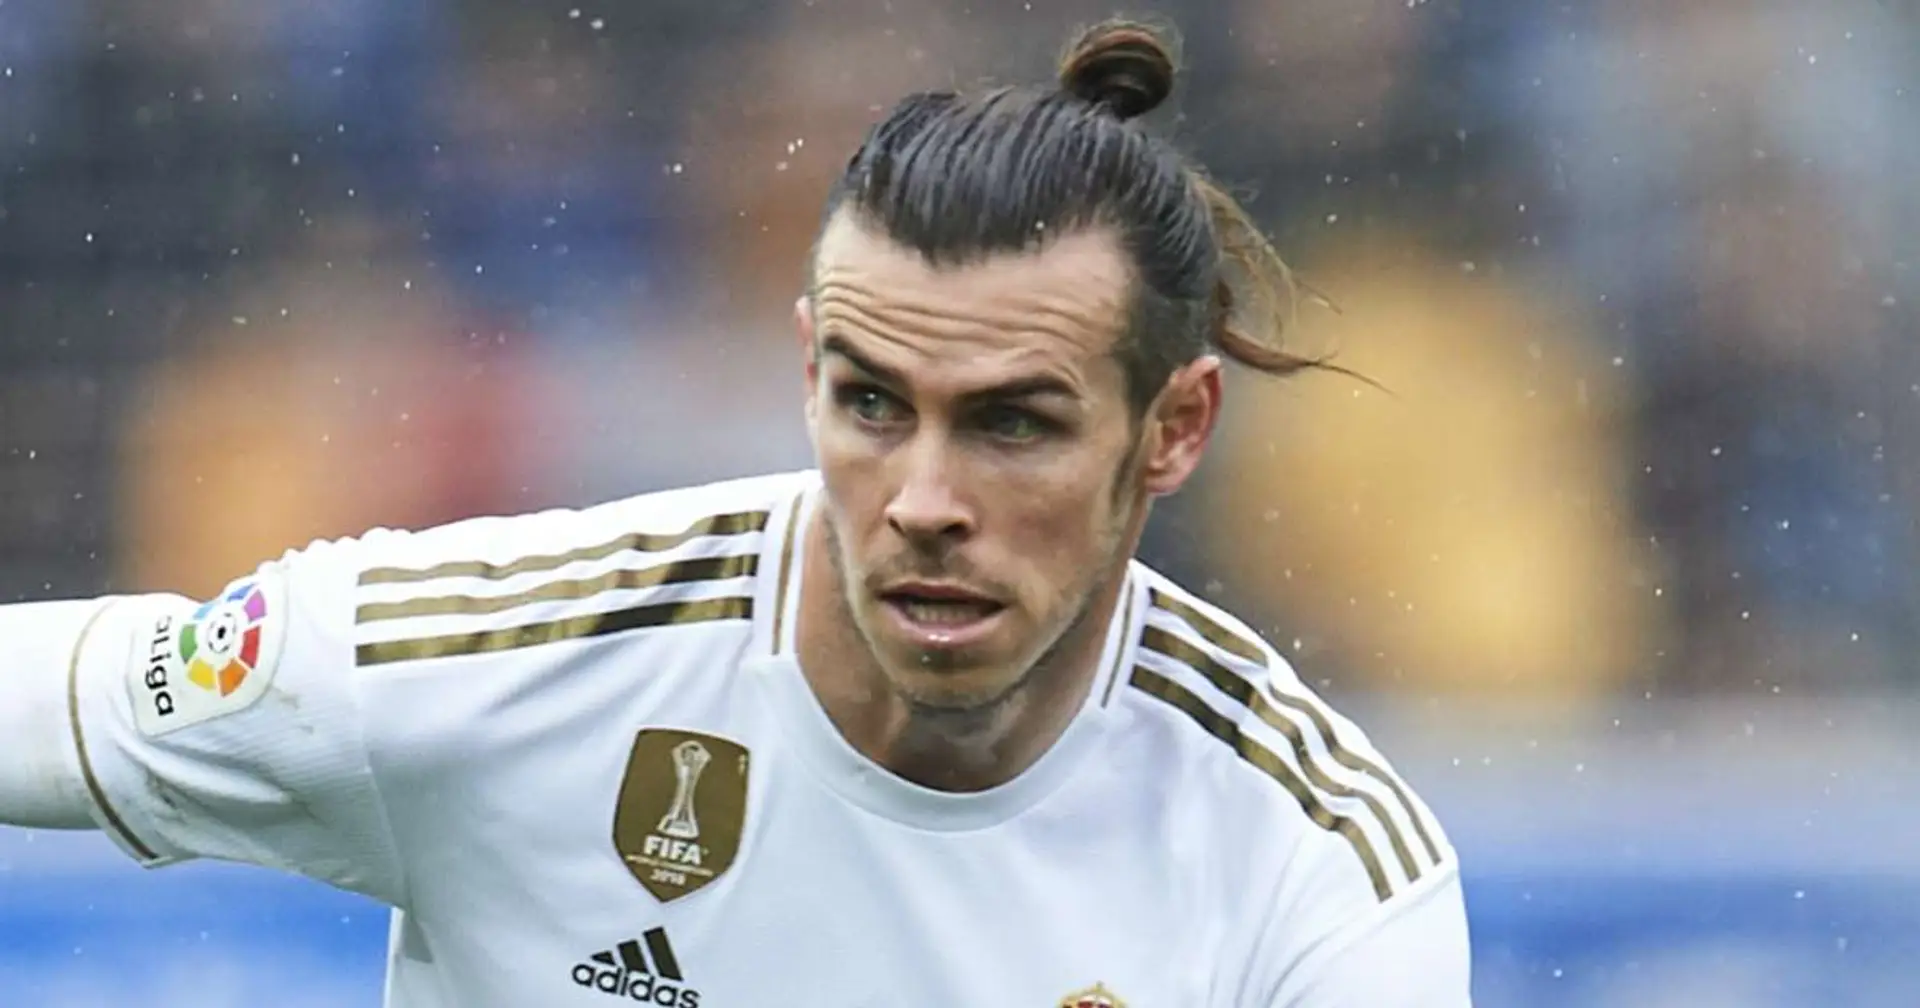 'World-class talent' Gareth Bale told to seal Premier League move amid Man United links